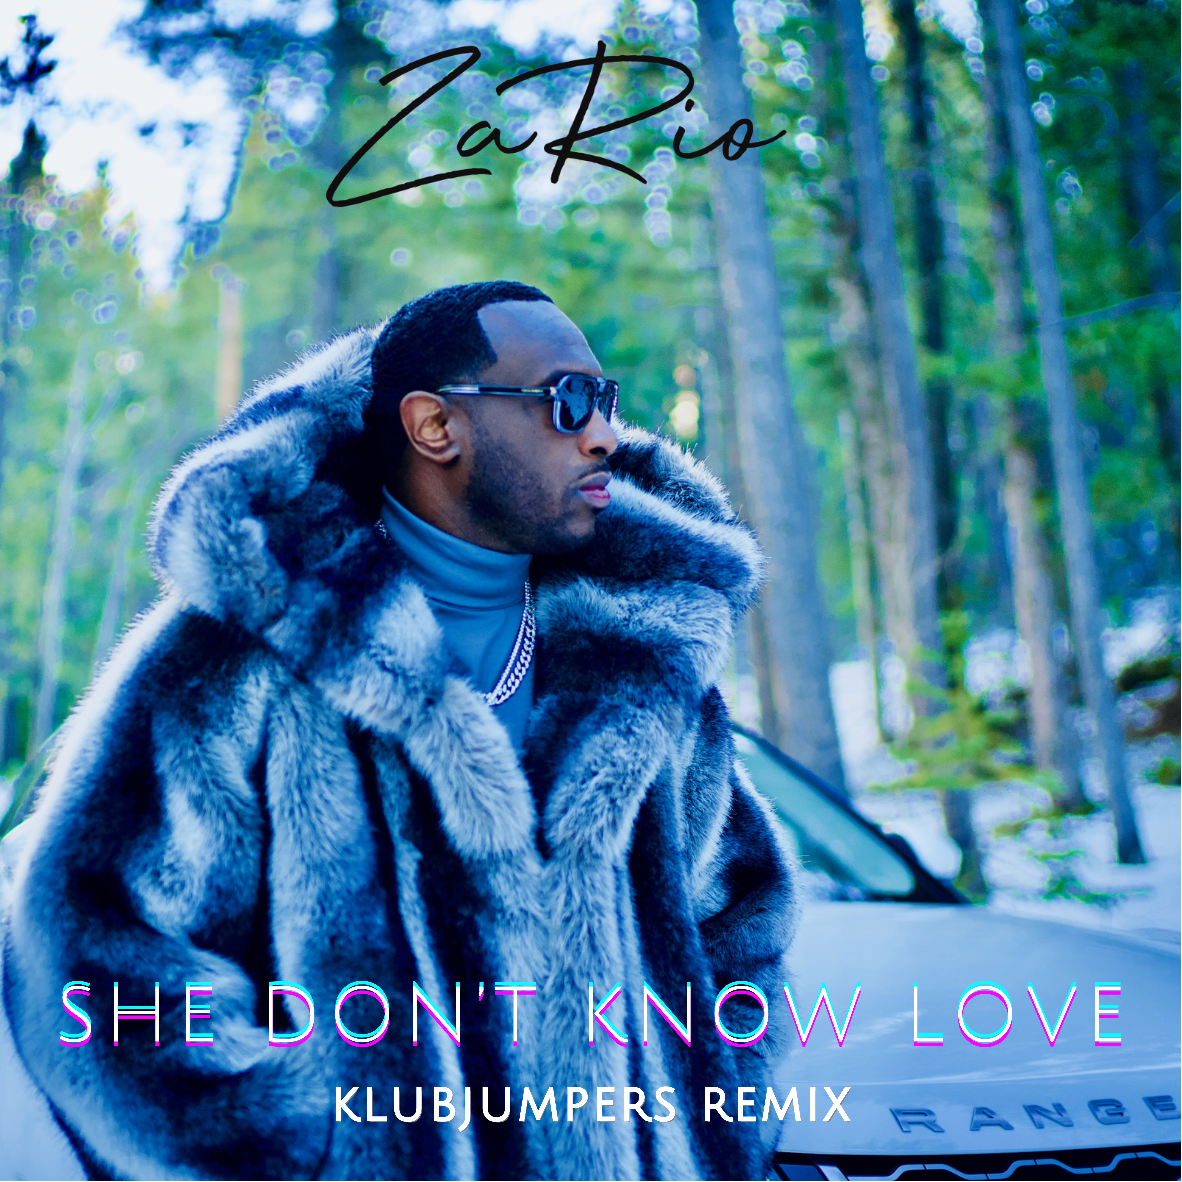 [Single] Zario ‘She Don’t Know Love’ (Klubjumpers Remix)